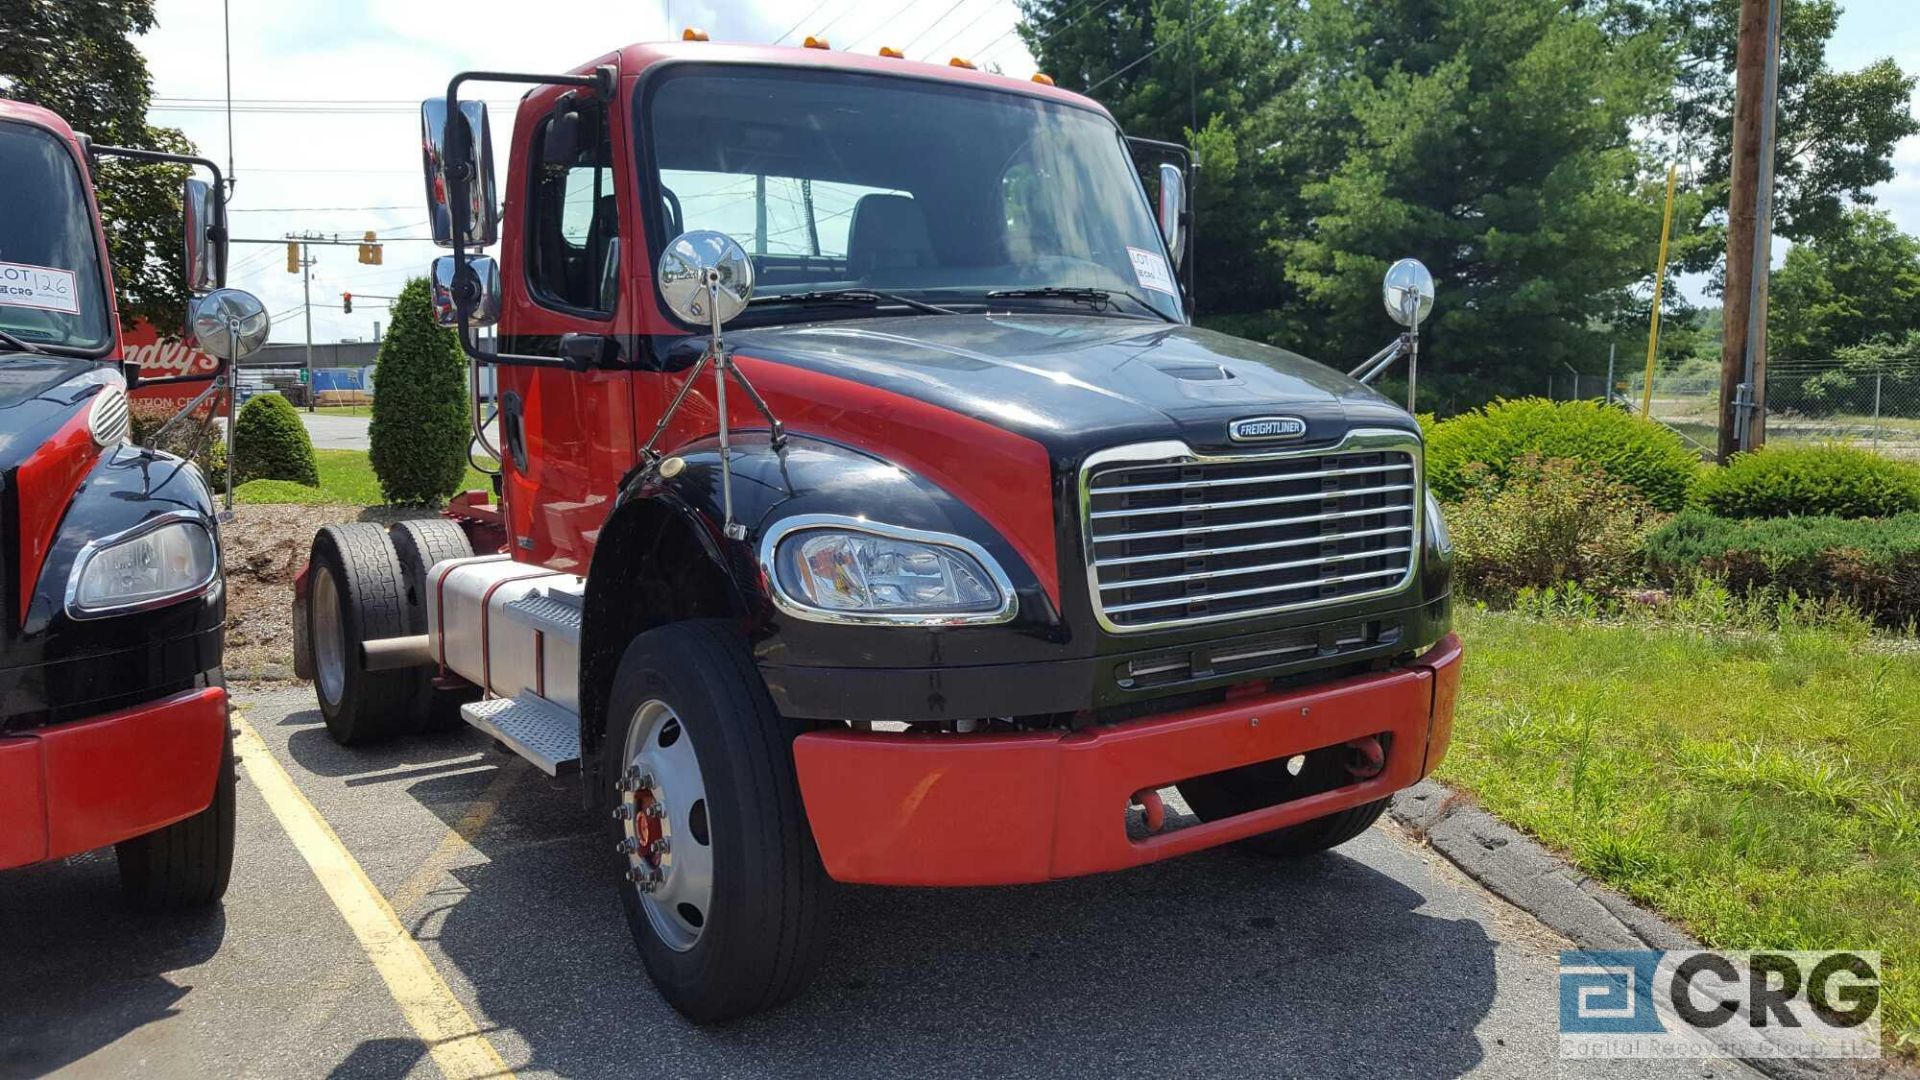 2006 Freightliner Business Class M2, SA tractor, with Eaton Fuller, 10 speed transmission, Simplex - Image 2 of 5